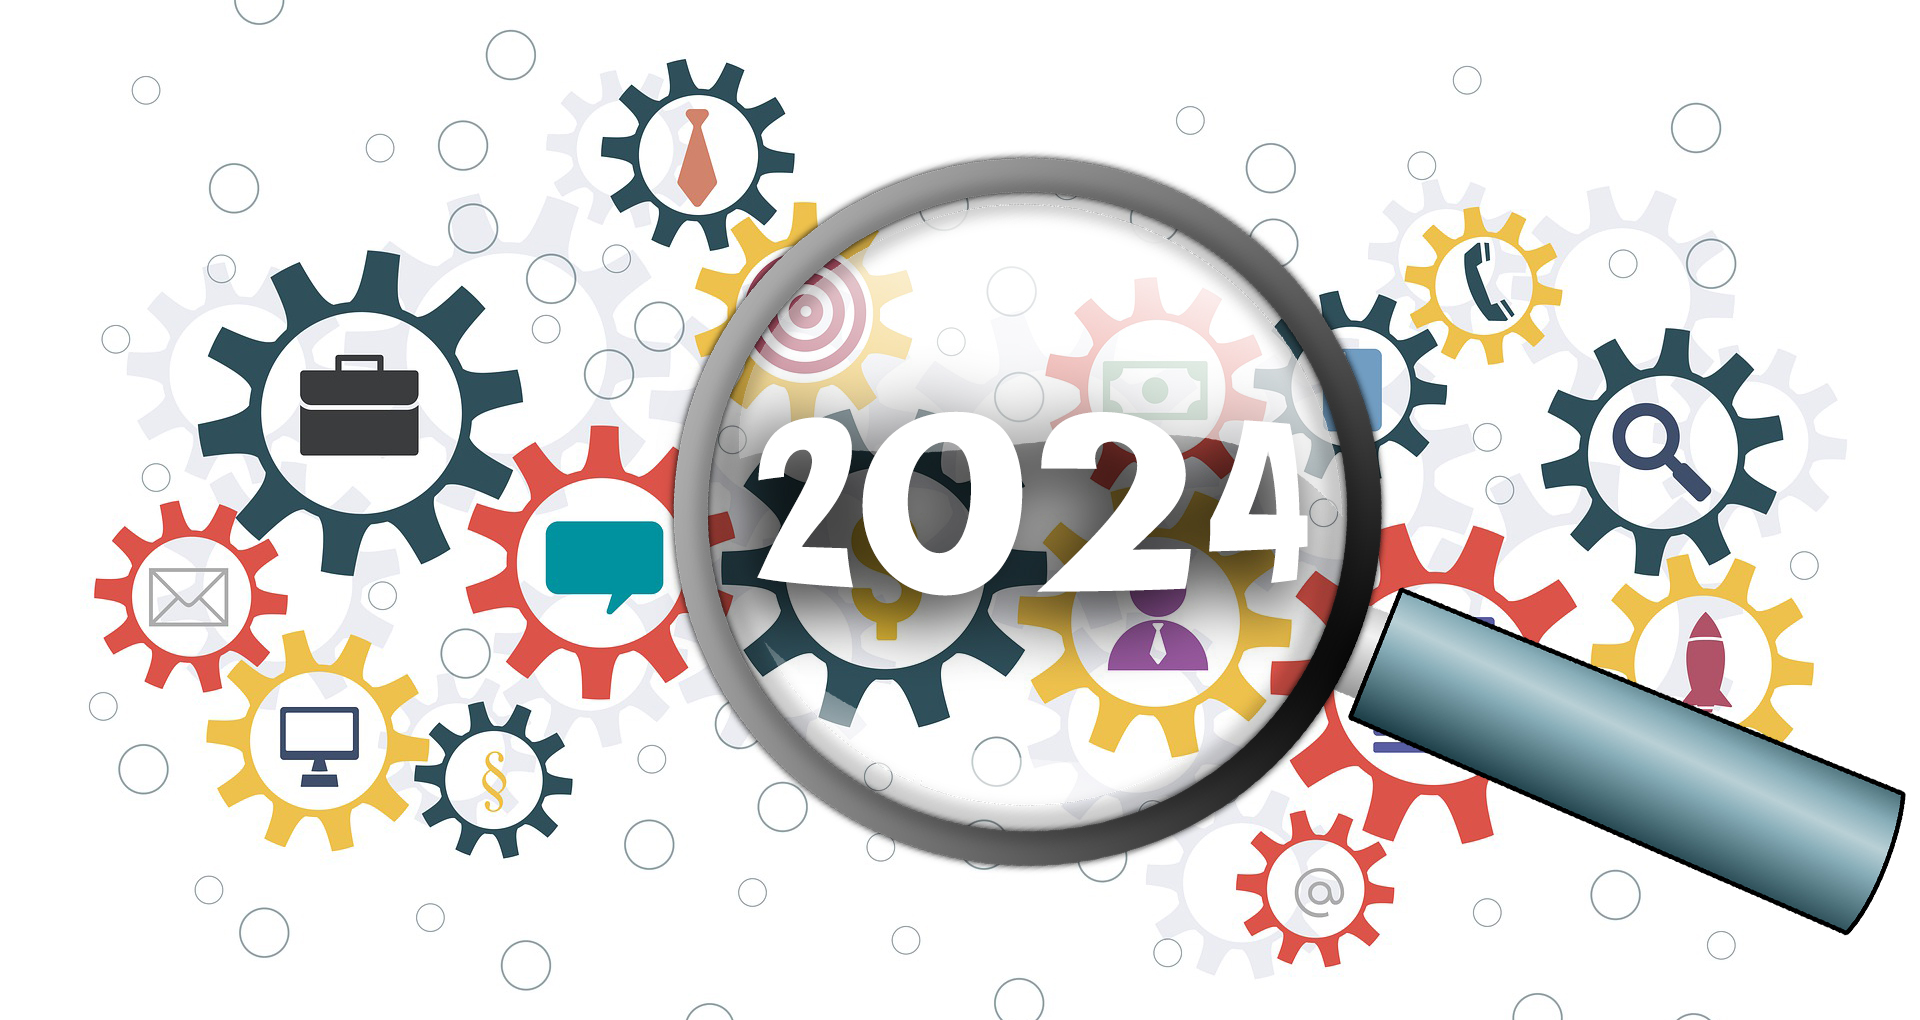 3 Ways to Focus Your Marketing Strategy for Maximum Impact in 2024